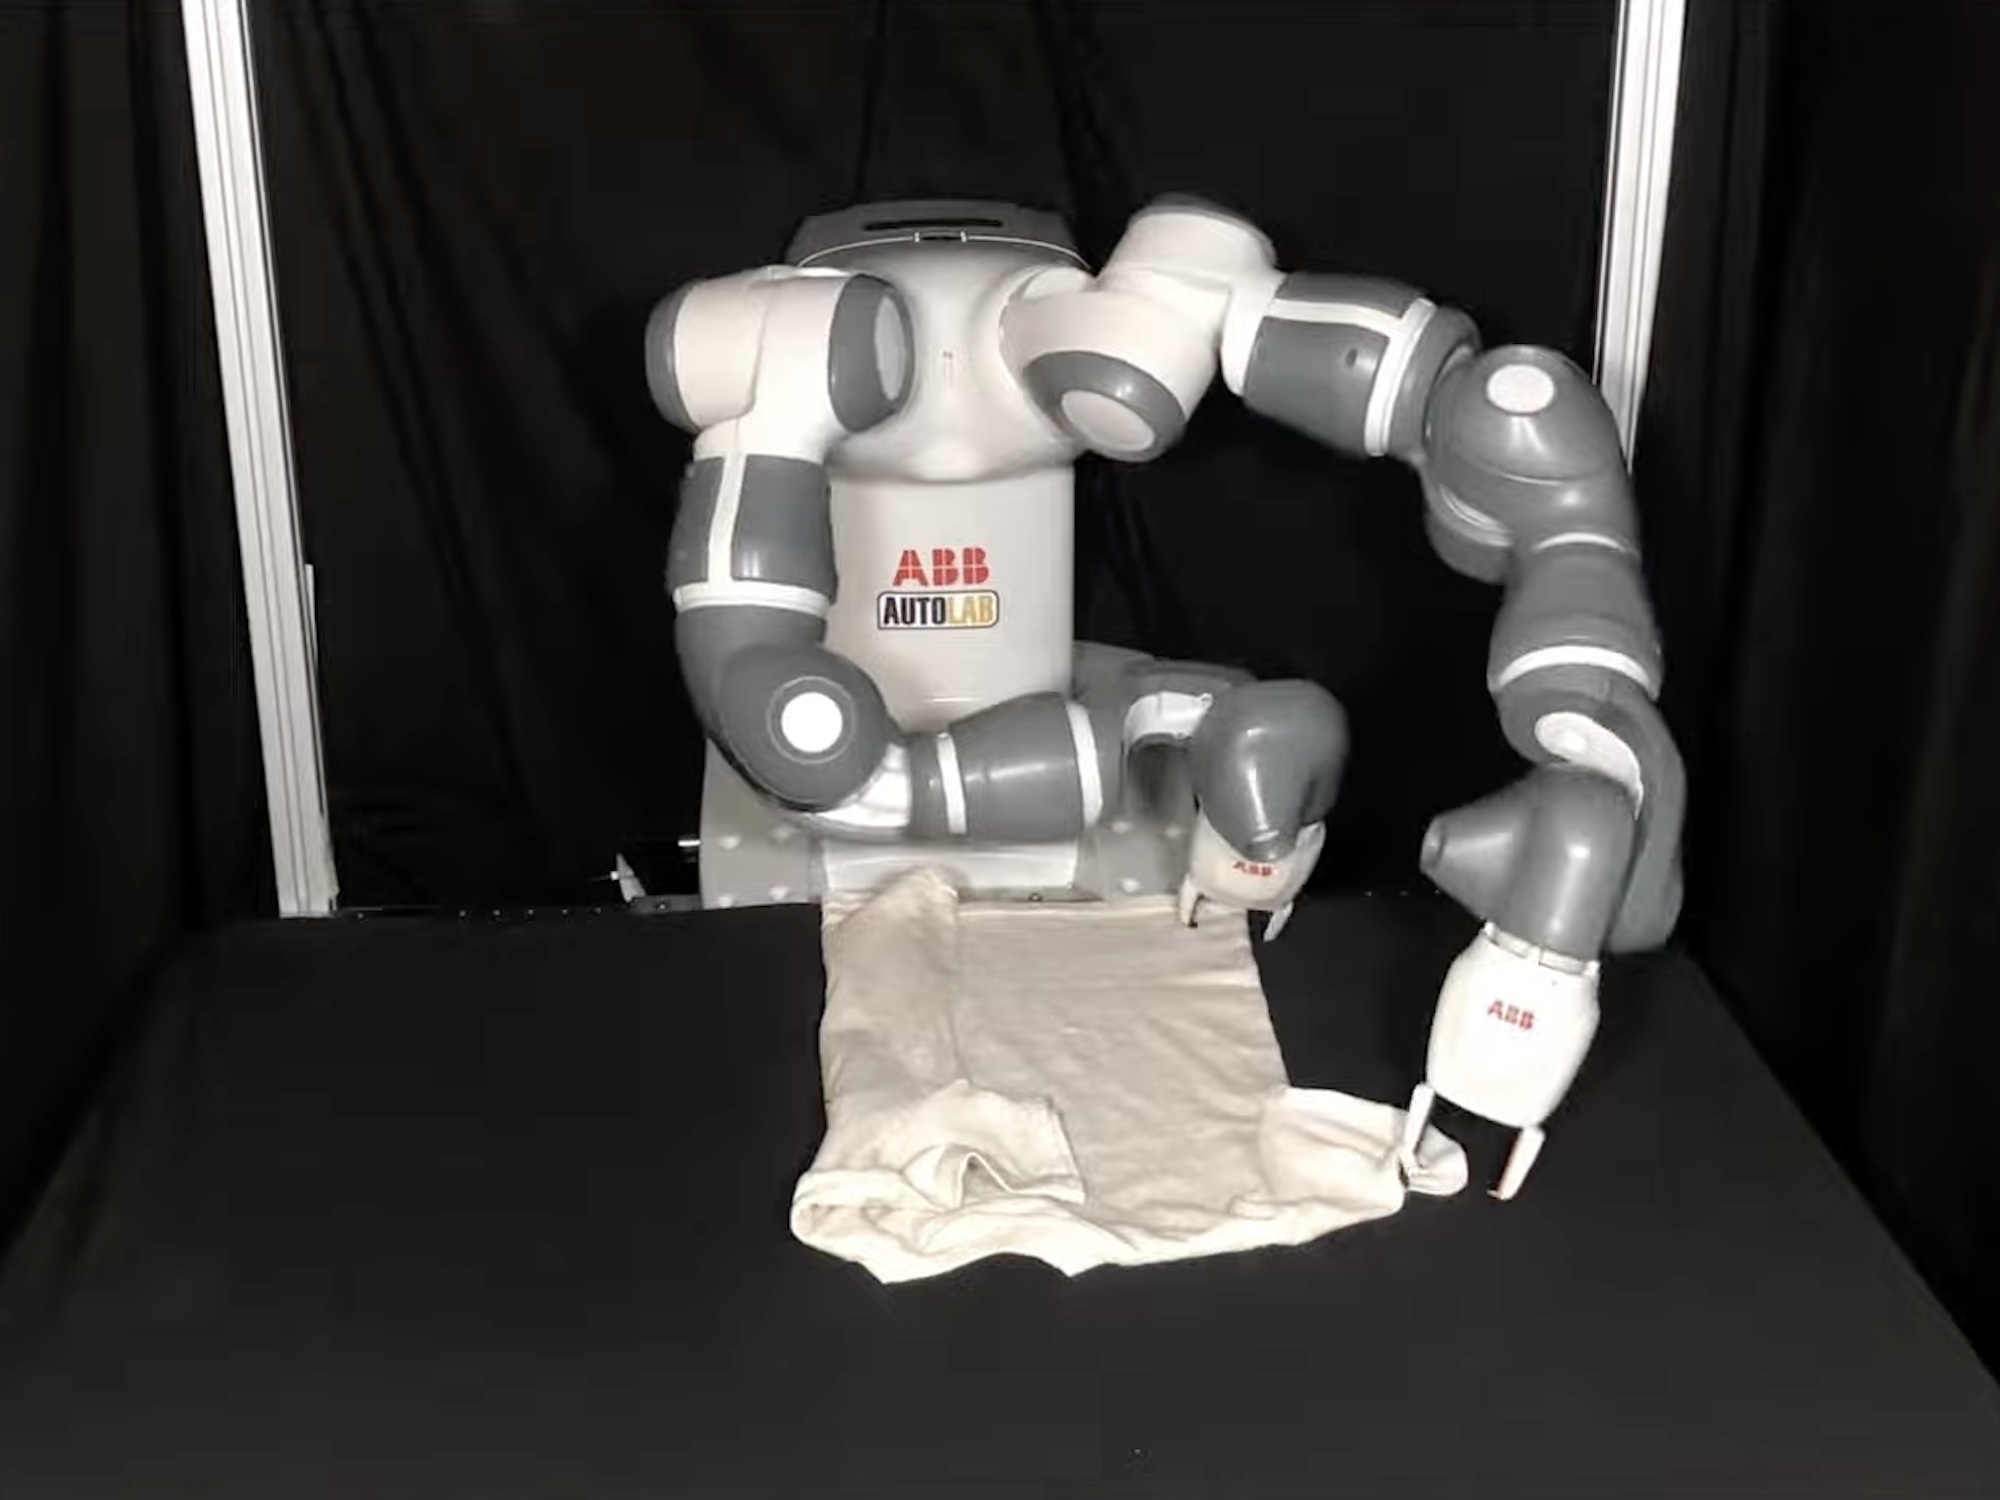 This $16,000 robot uses artificial intelligence to sort and fold laundry -  The Verge